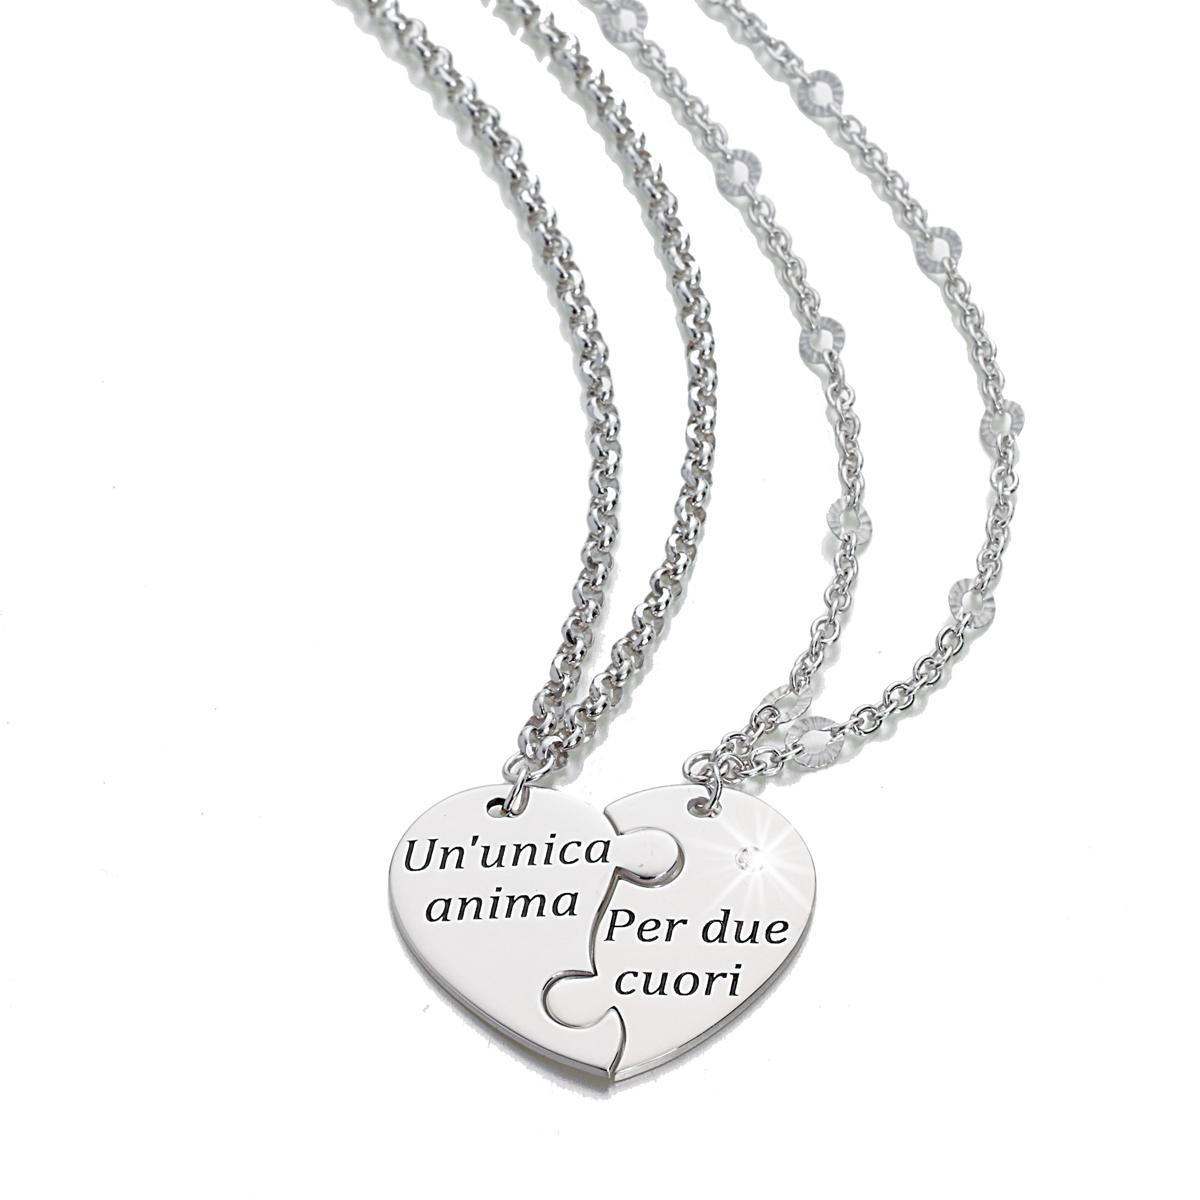 Two rhodium-plated silver necklaces (one with a diamond) - Perfect Valentine's Day gift - ZCL1359-MB